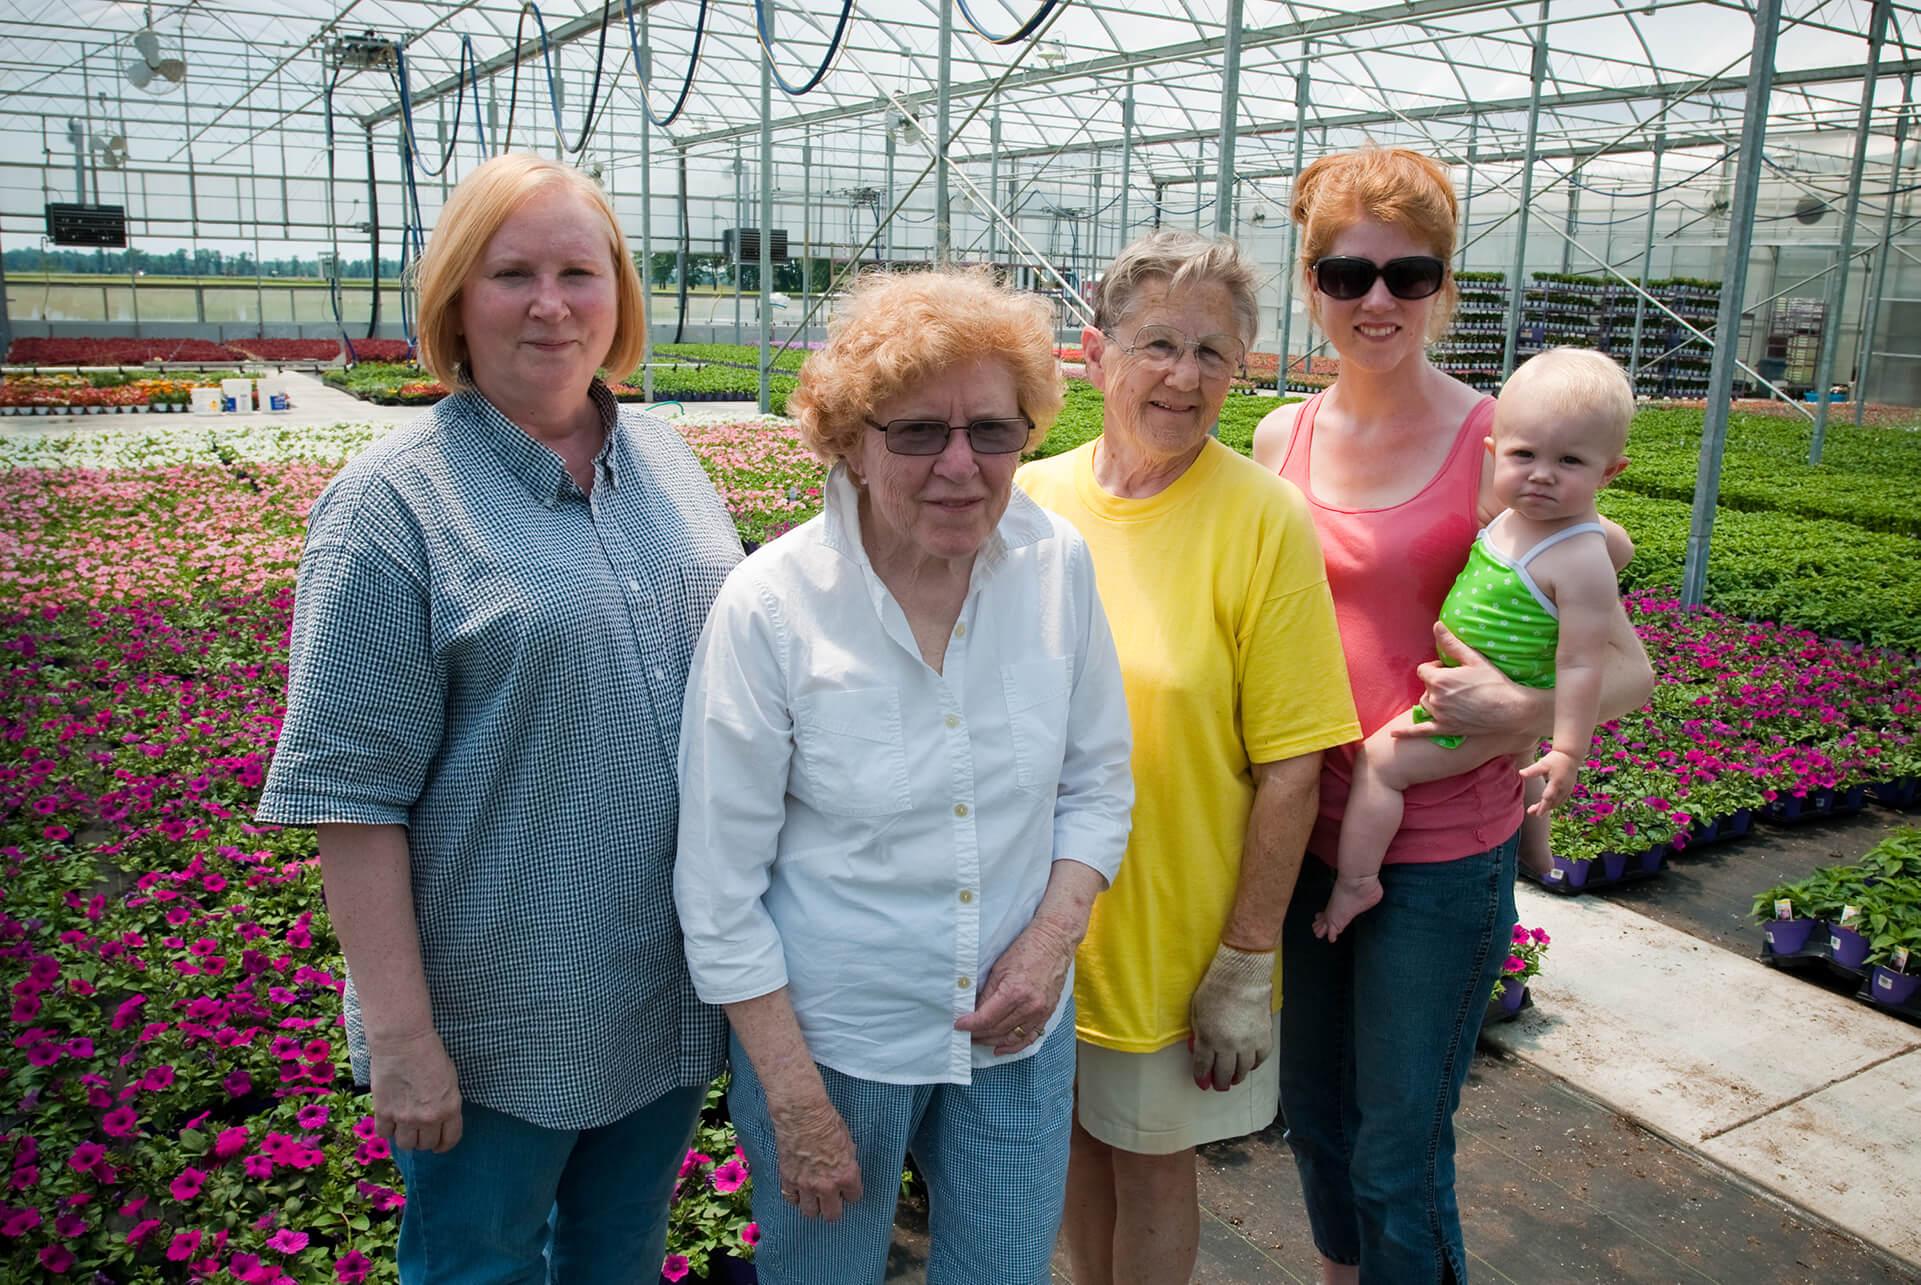 A generation of women farmers standing in a greenhouse filled with flowers